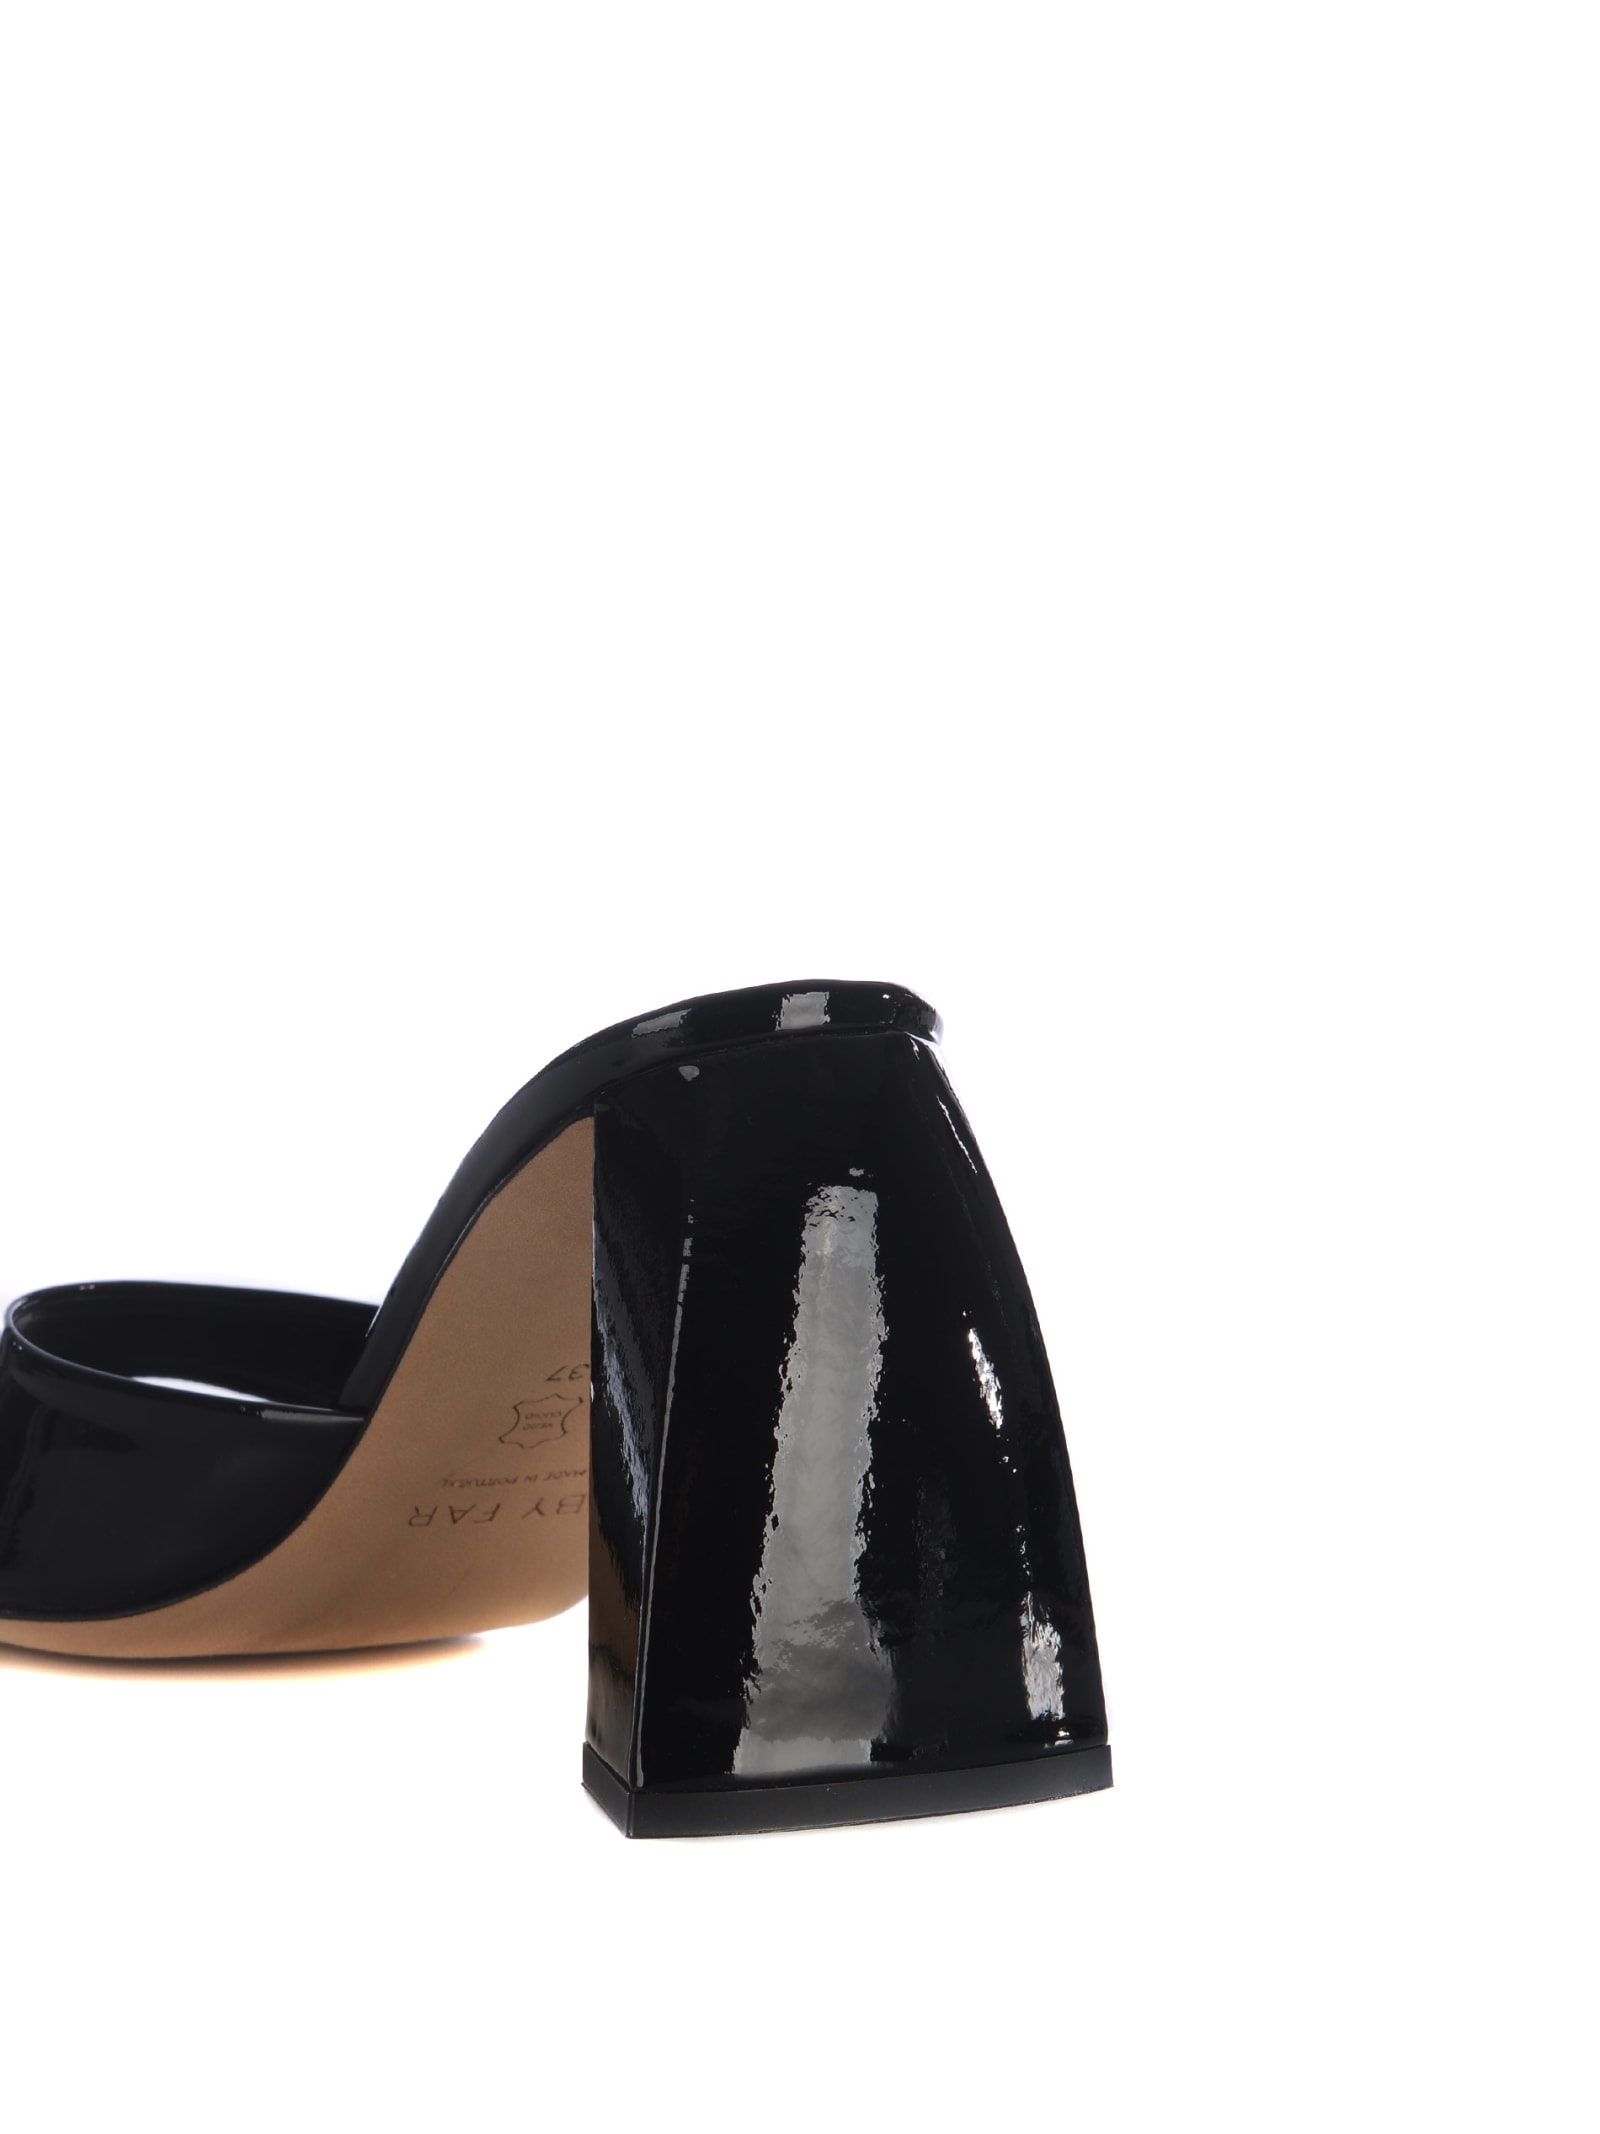 Shop By Far Sandal  Michele In Semi-gloss Leather Available Store Pompei In Nero